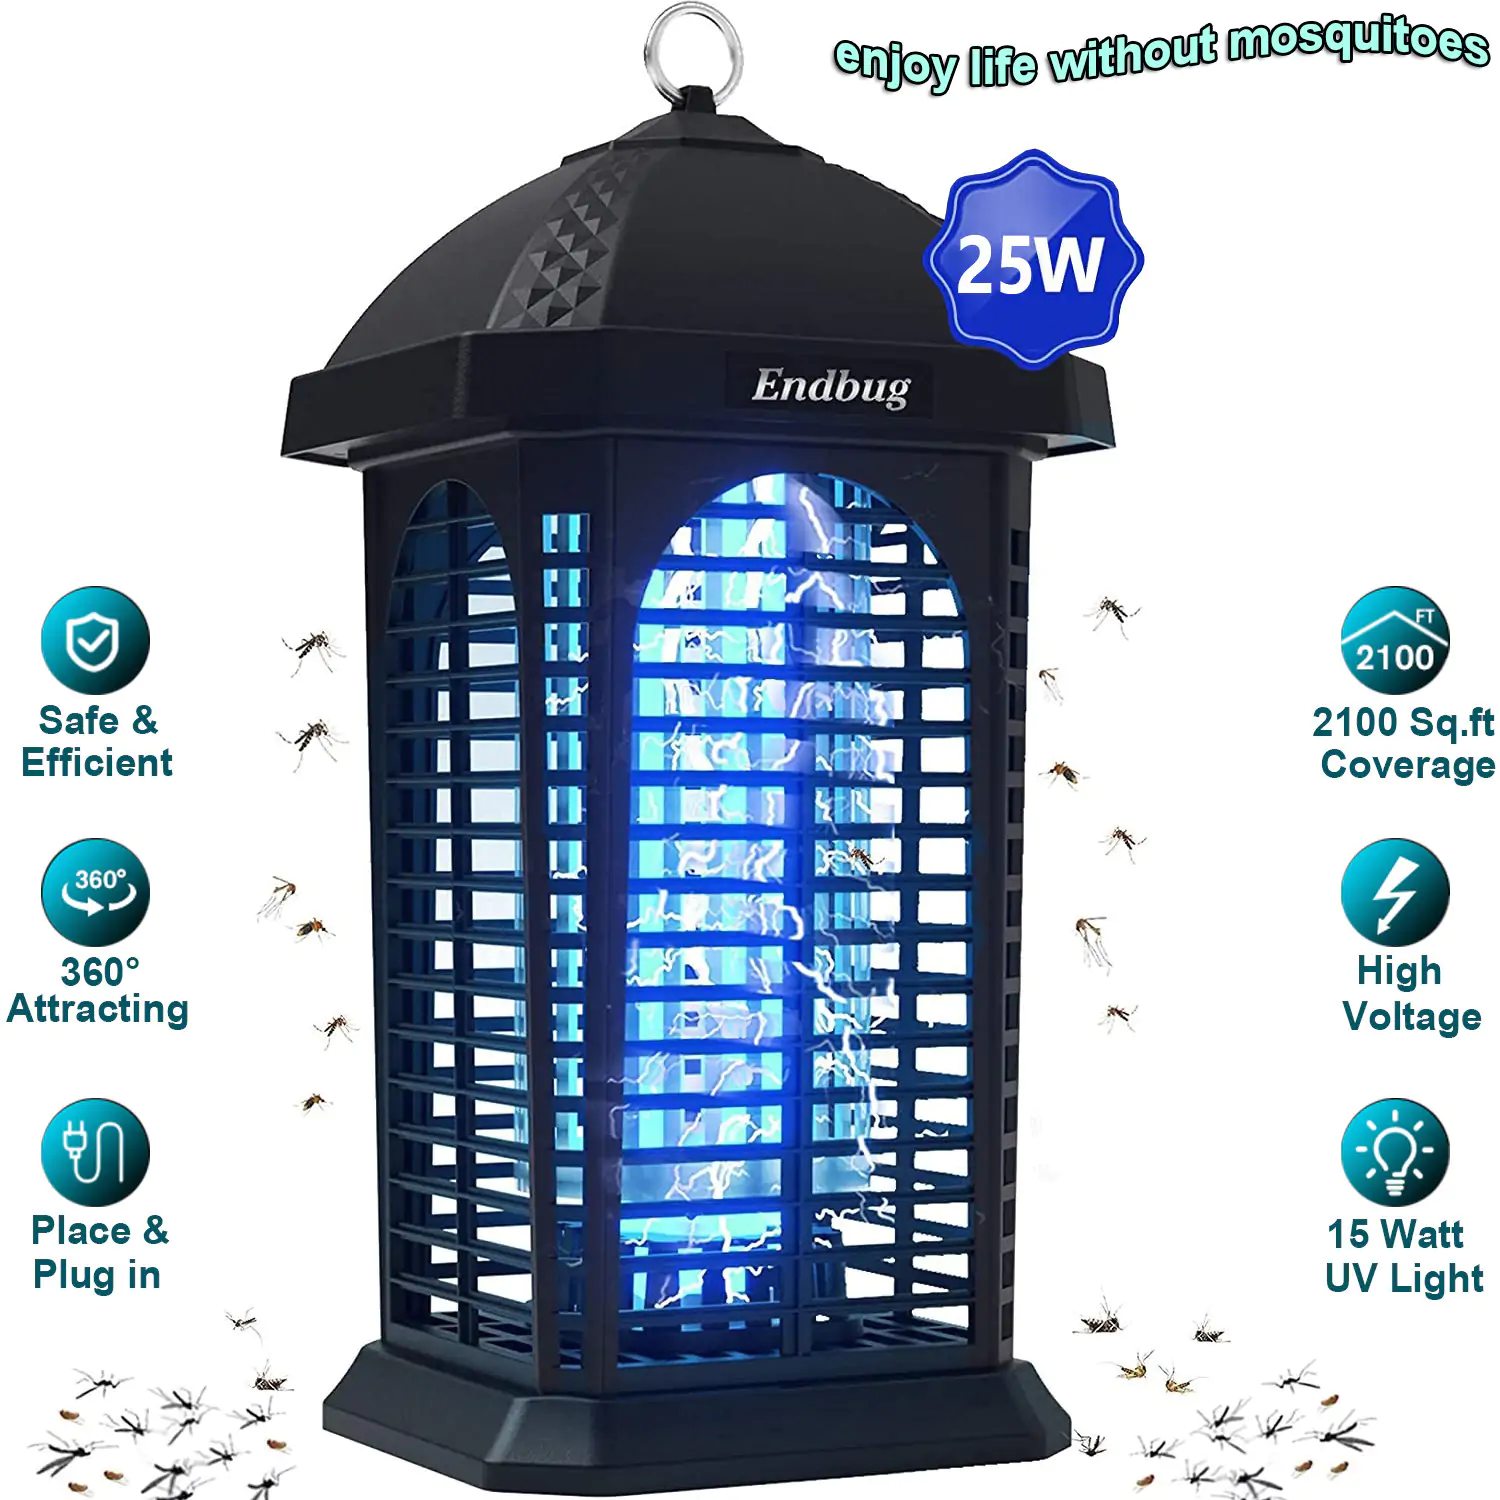 Mosquito Killer Lamp, Powerful Electronic Insect Attractant Trap Powerful  Bug Light Insect Killer